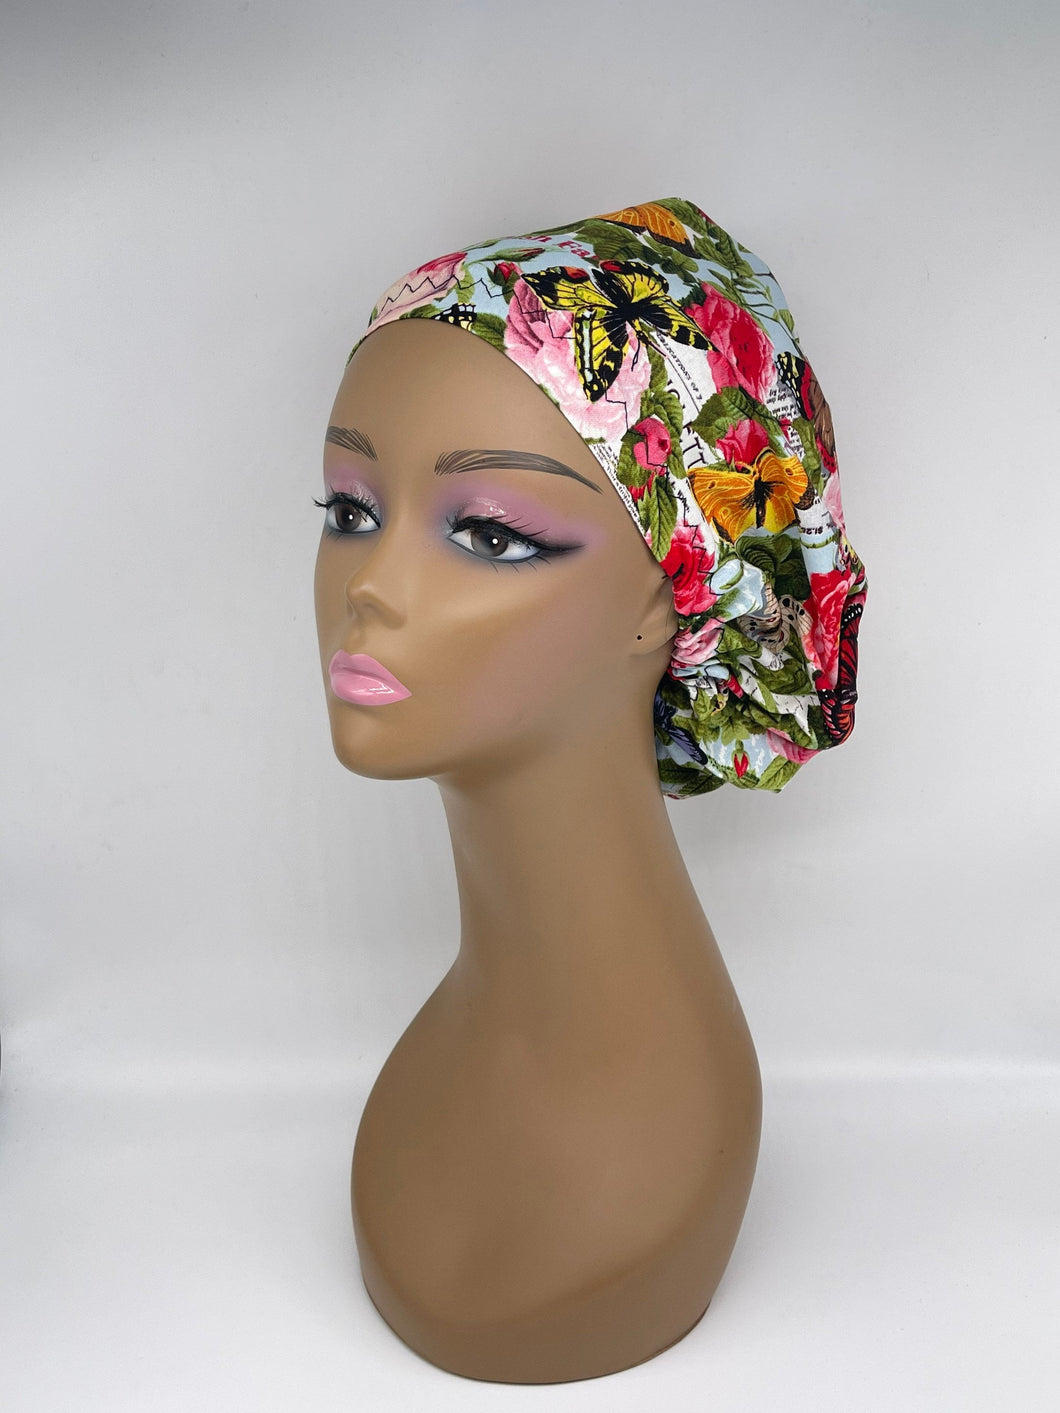 Niceroy surgical SCRUB HAT CAP, Europe style nursing caps made with floral butterfly Cotton fabric and satin lining option bonnet chemo hat